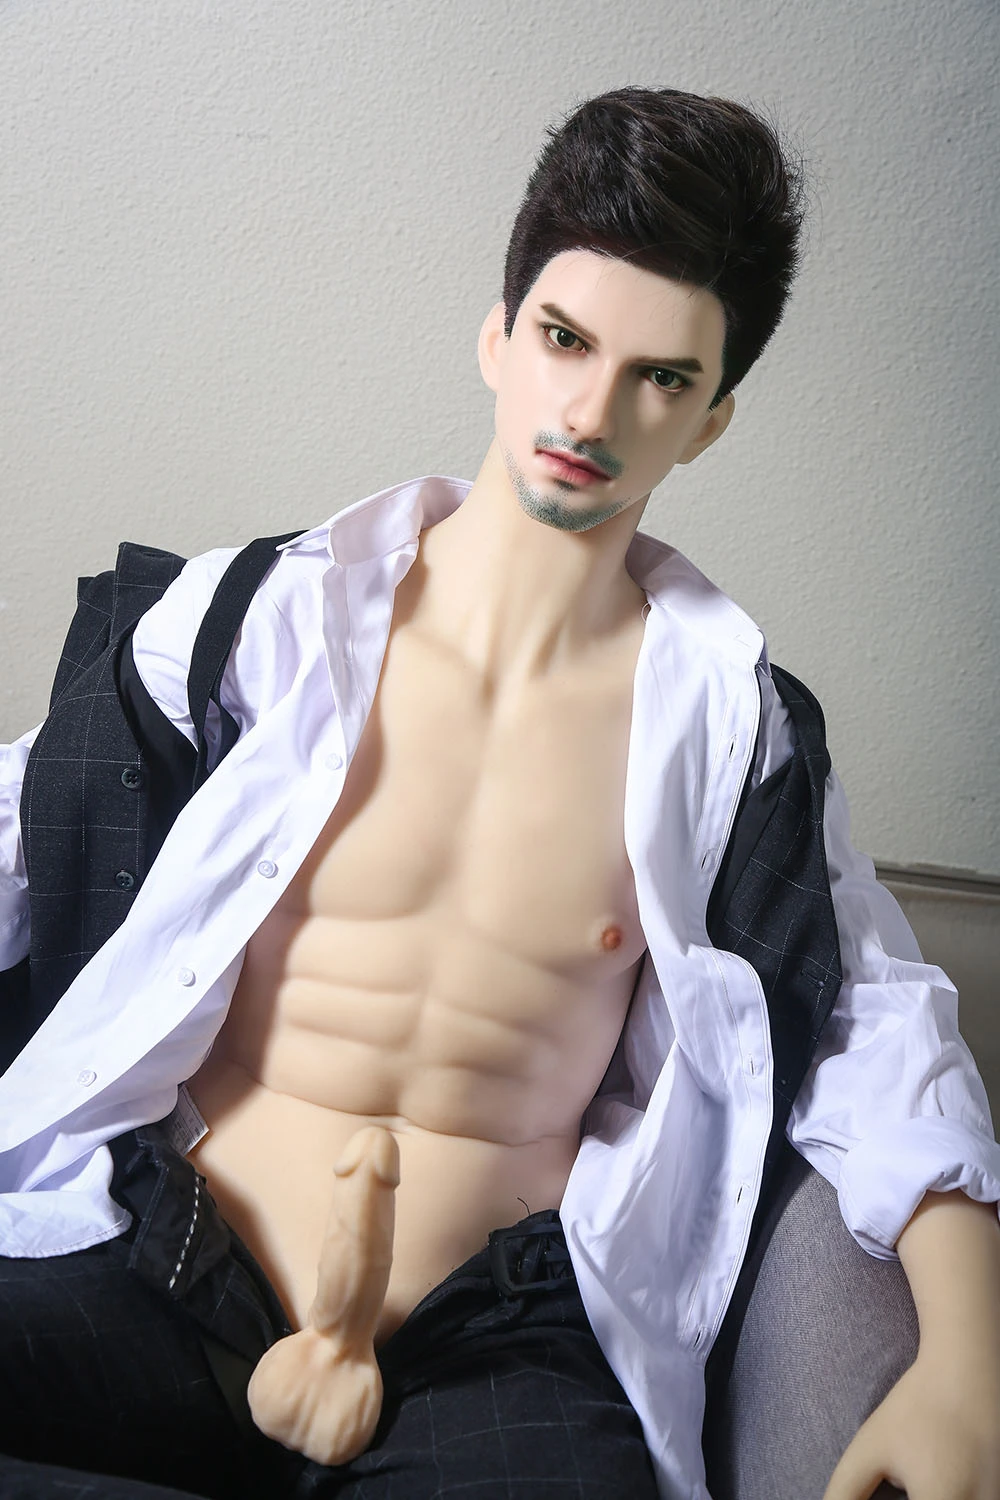 Handsome male sex doll